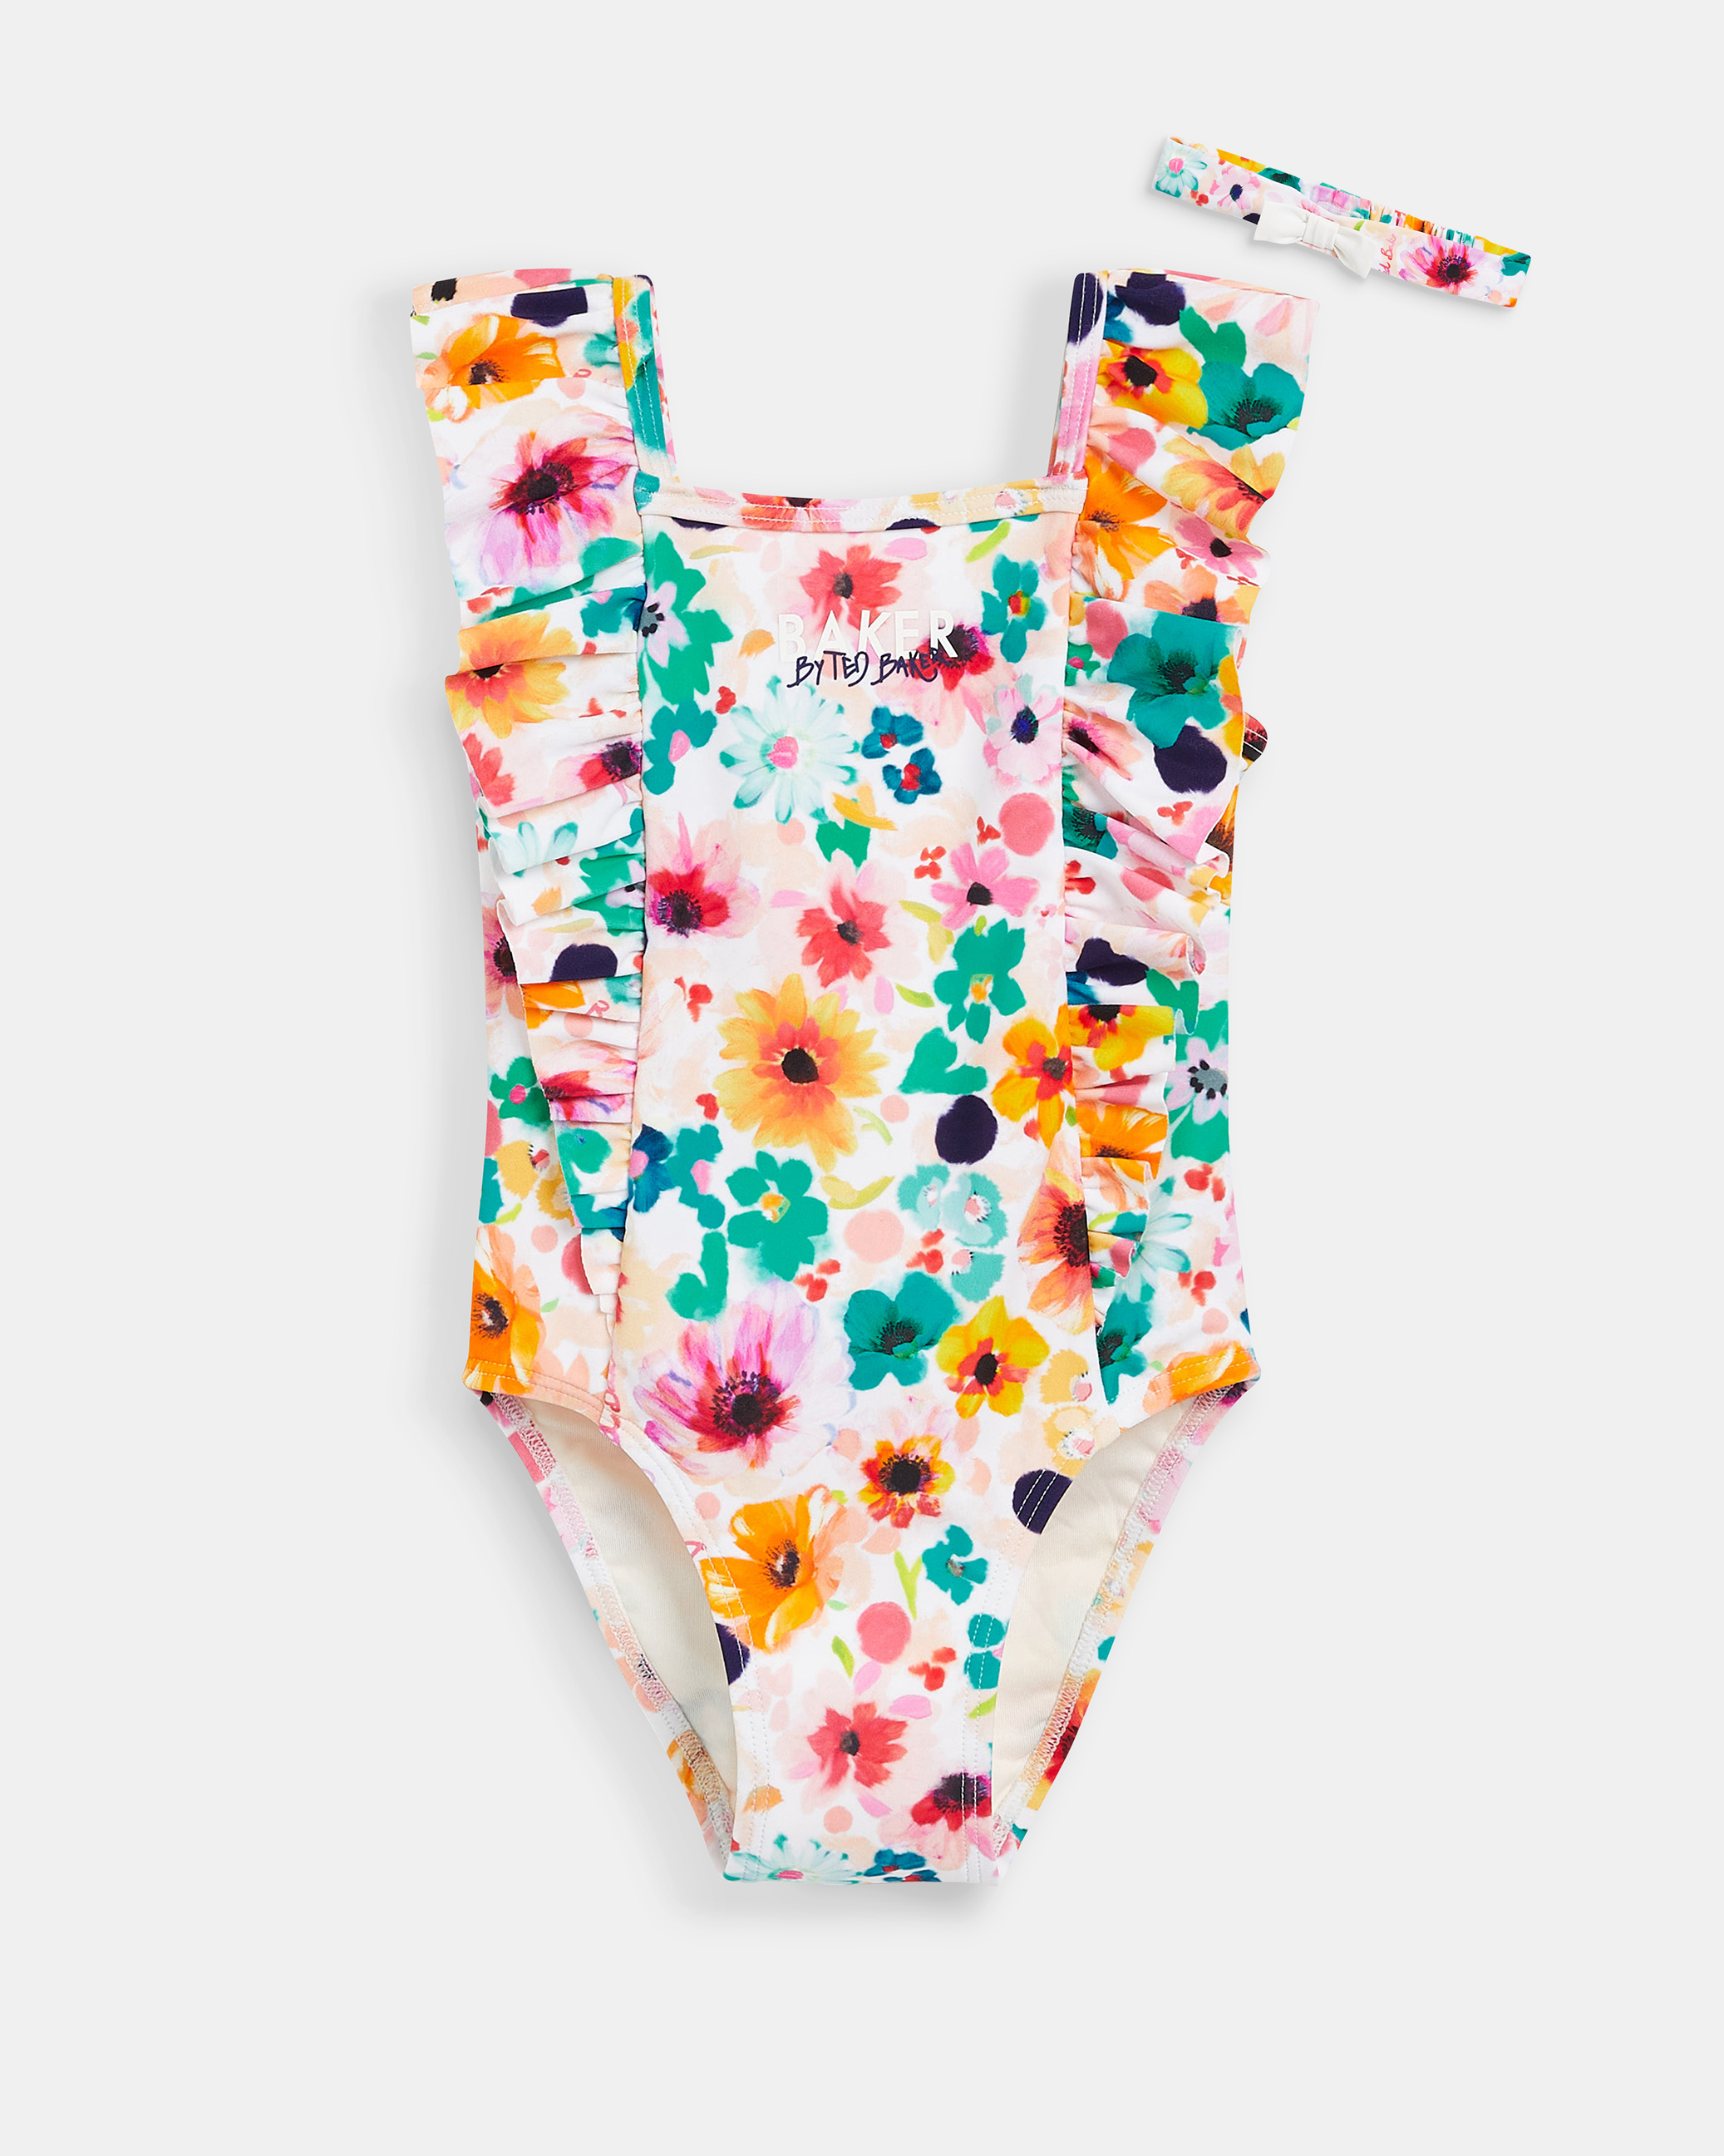 Ted Baker Boys Sunsafe Swim Suit Age 4-5 Years